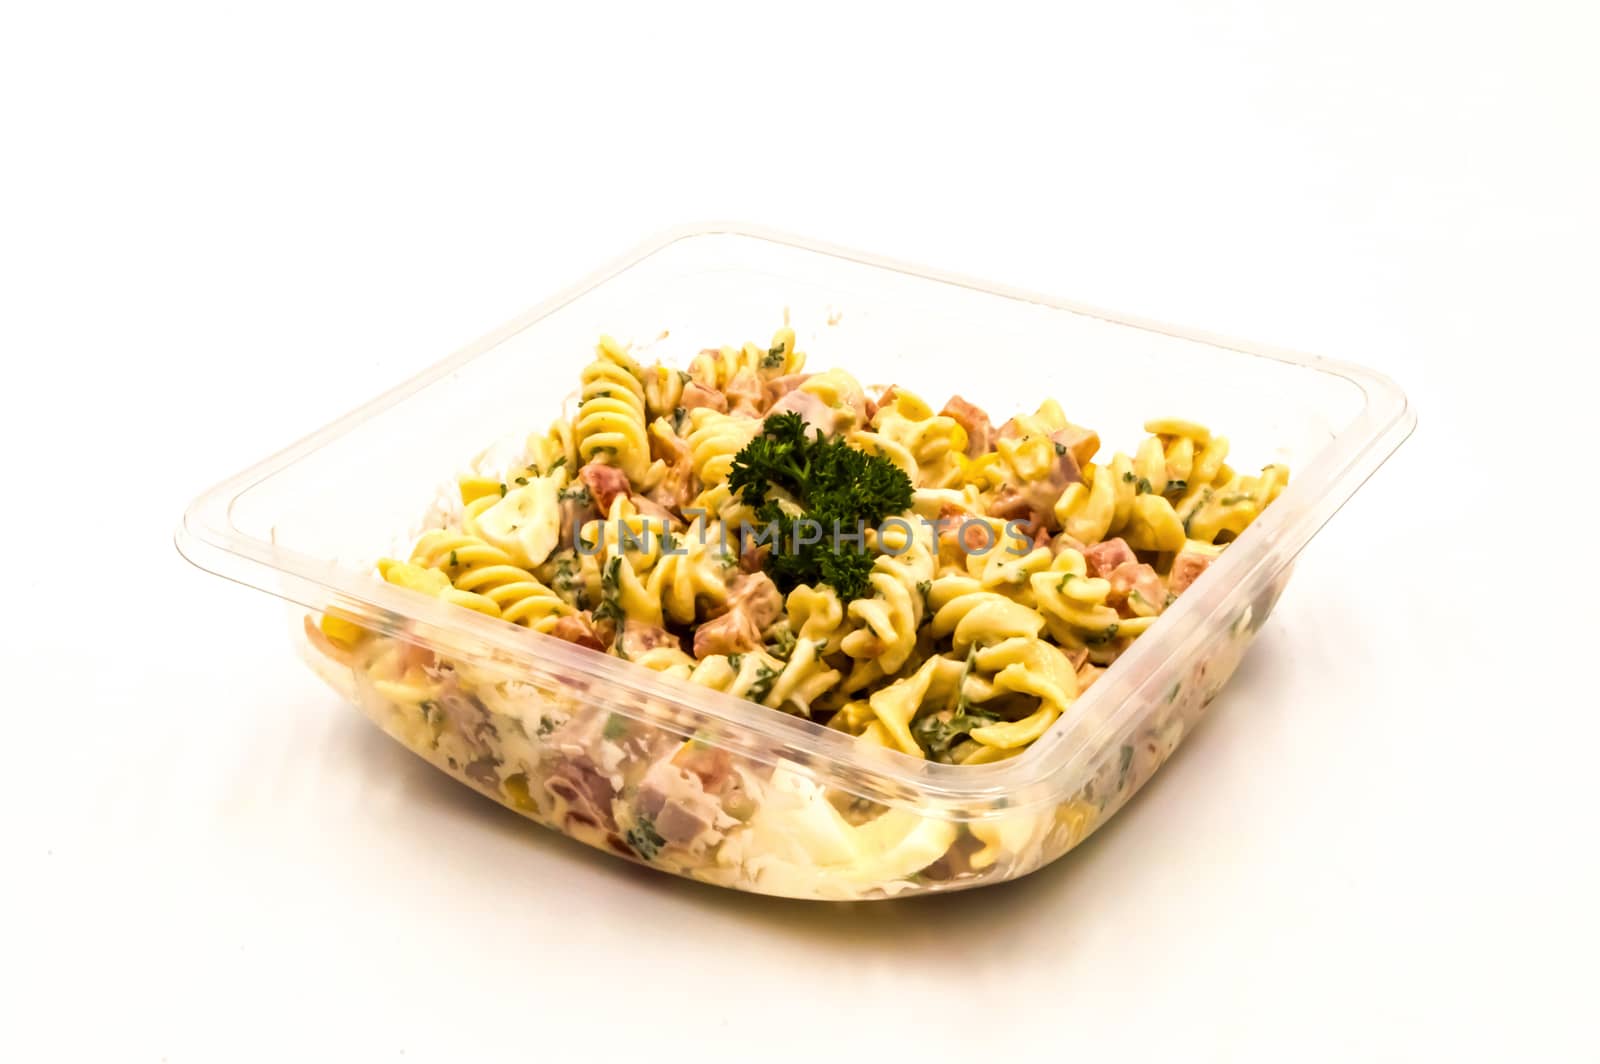 Tray of pasta salad on a white background